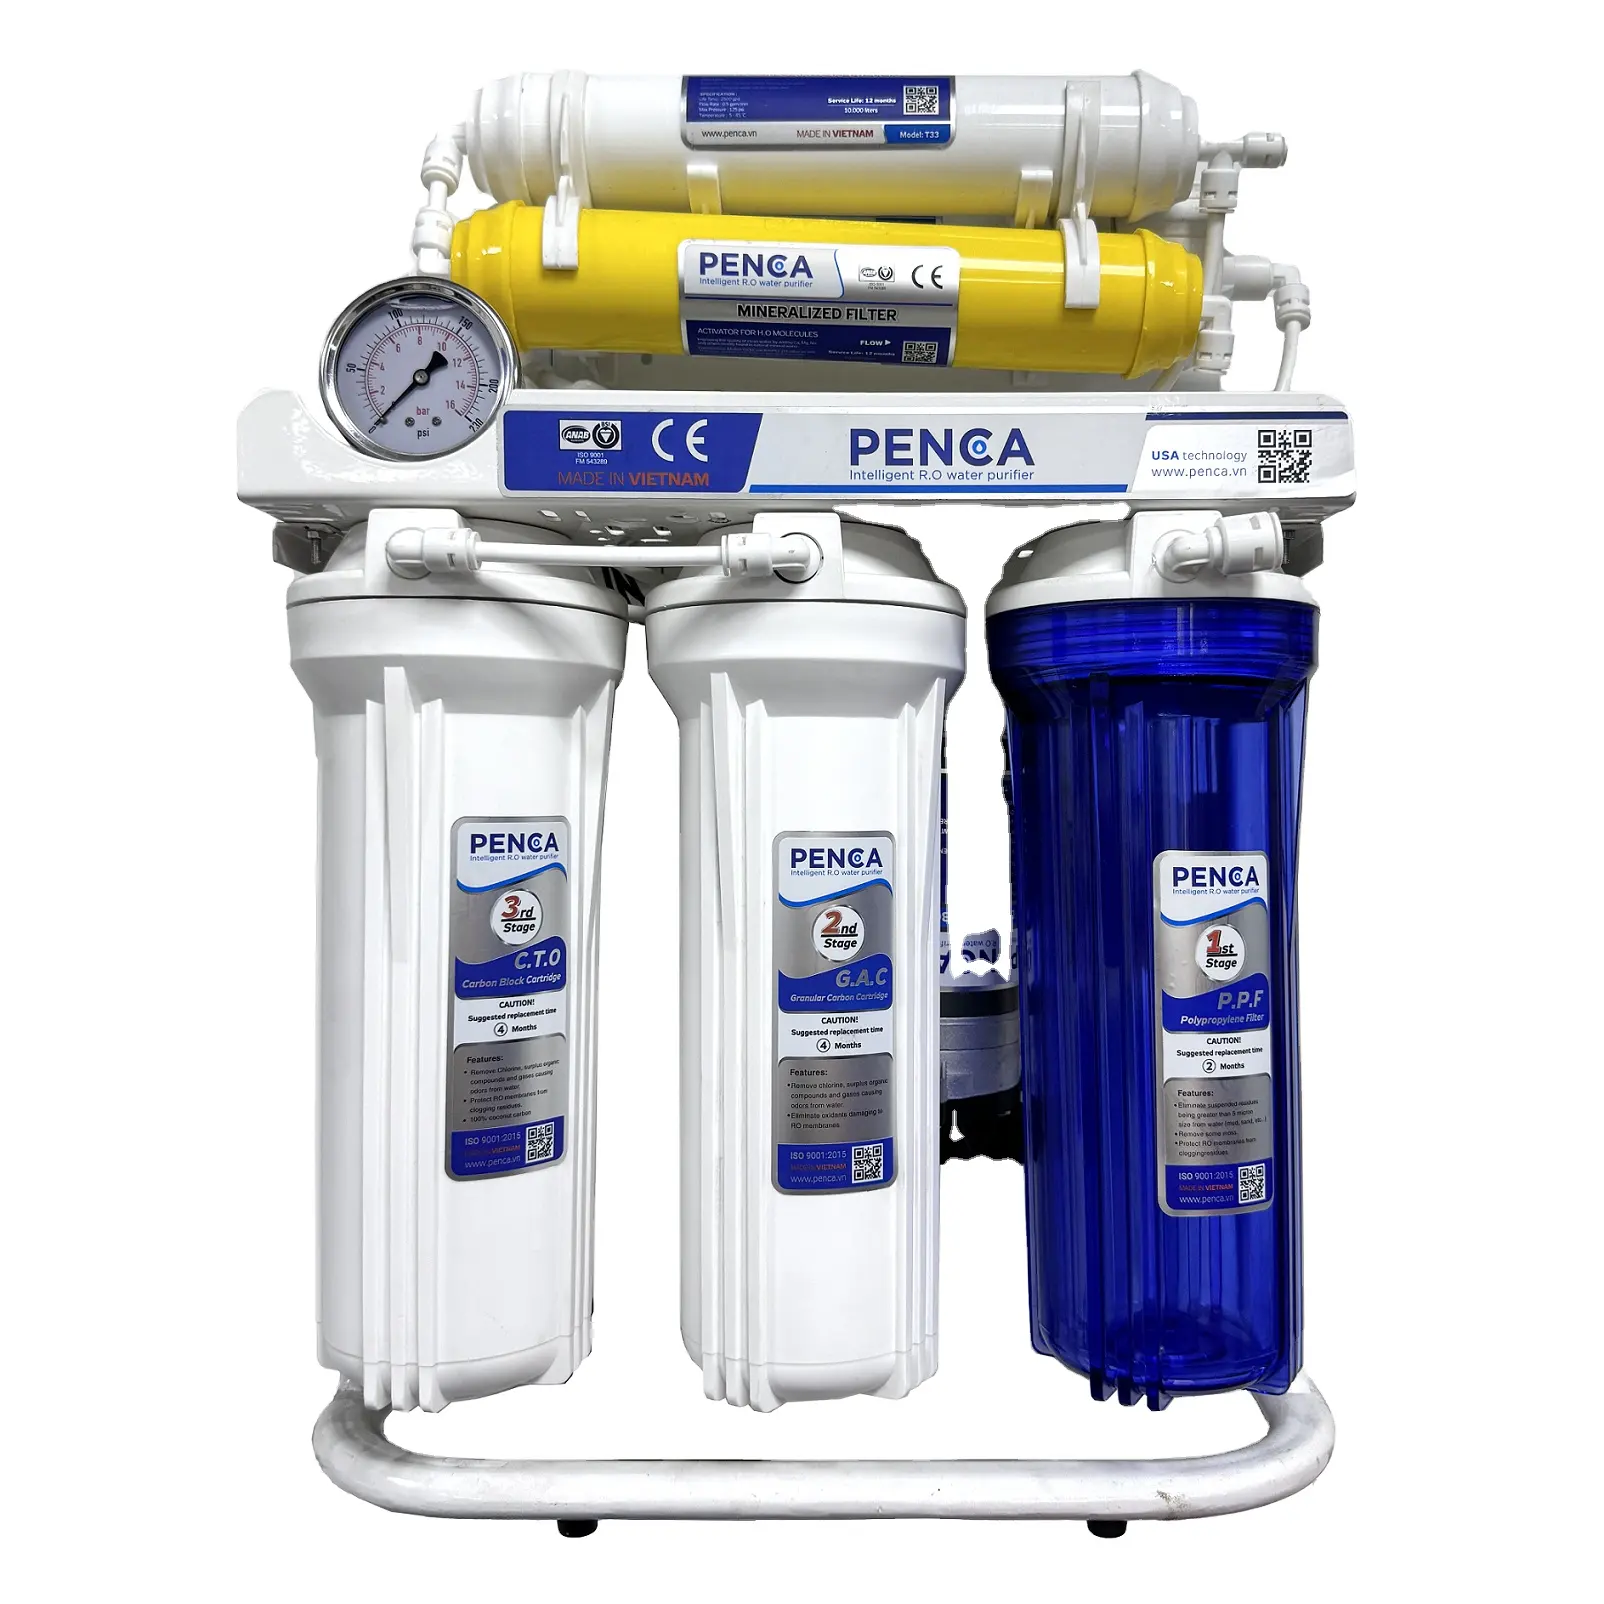 7 Stage Reverse Osmosis Water Filter System For Home Use Ro Water Purifier Water Filter Or Purifier Machinary